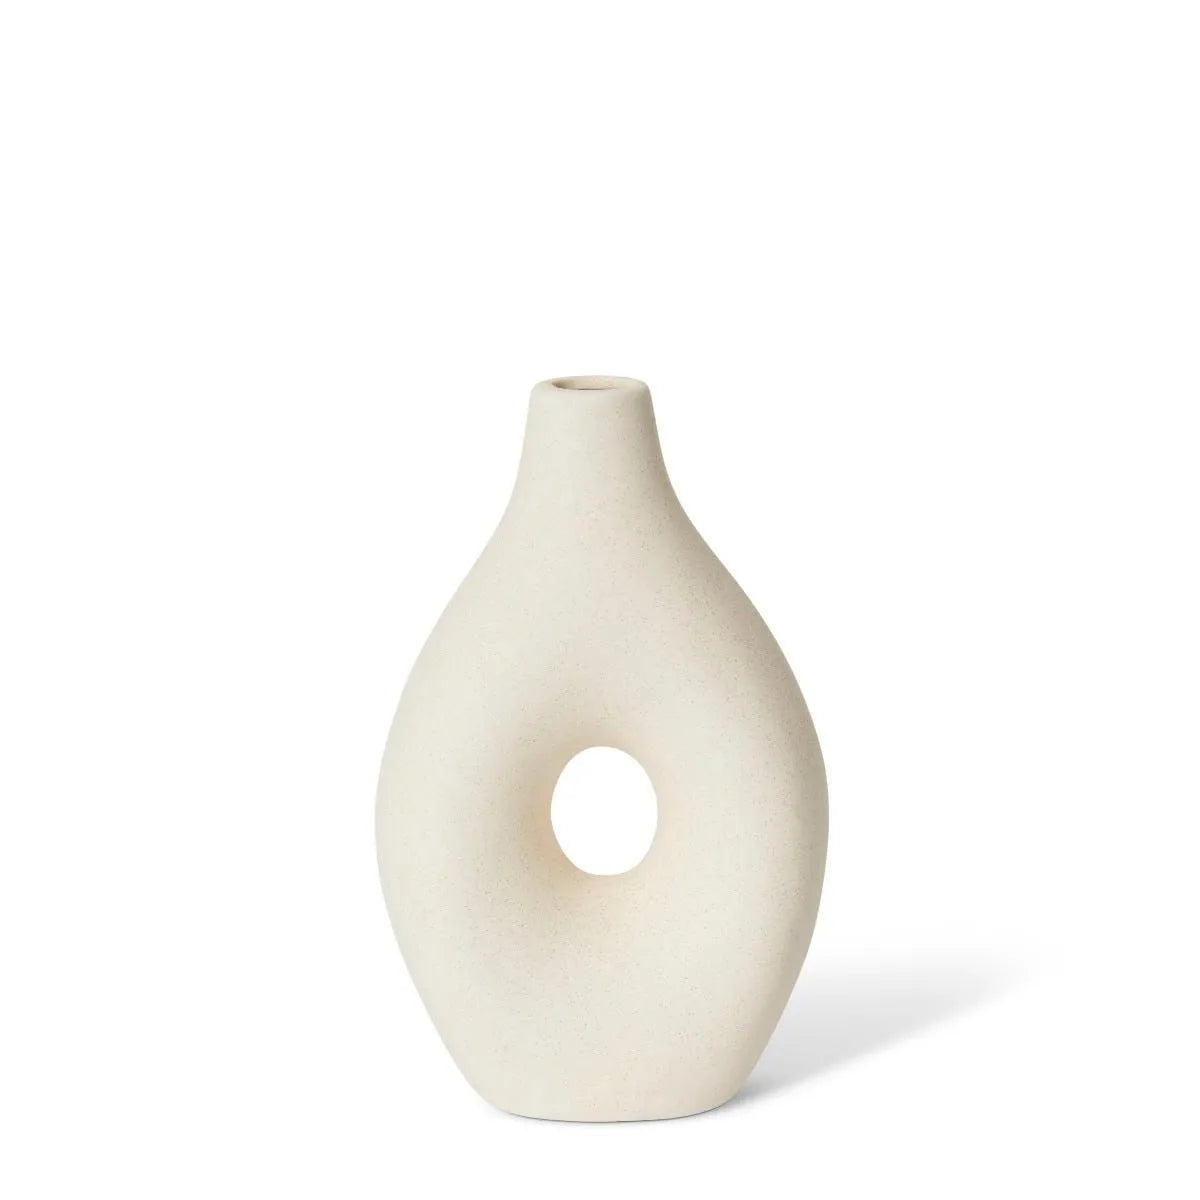 The Ariana Vase adds an eye-catching feature to any home décor with its unique and aesthetically pleasing design crafted from high-quality ceramic. Create an elegant display with this stylish vase, perfect for enhancing the interior of any home or office.